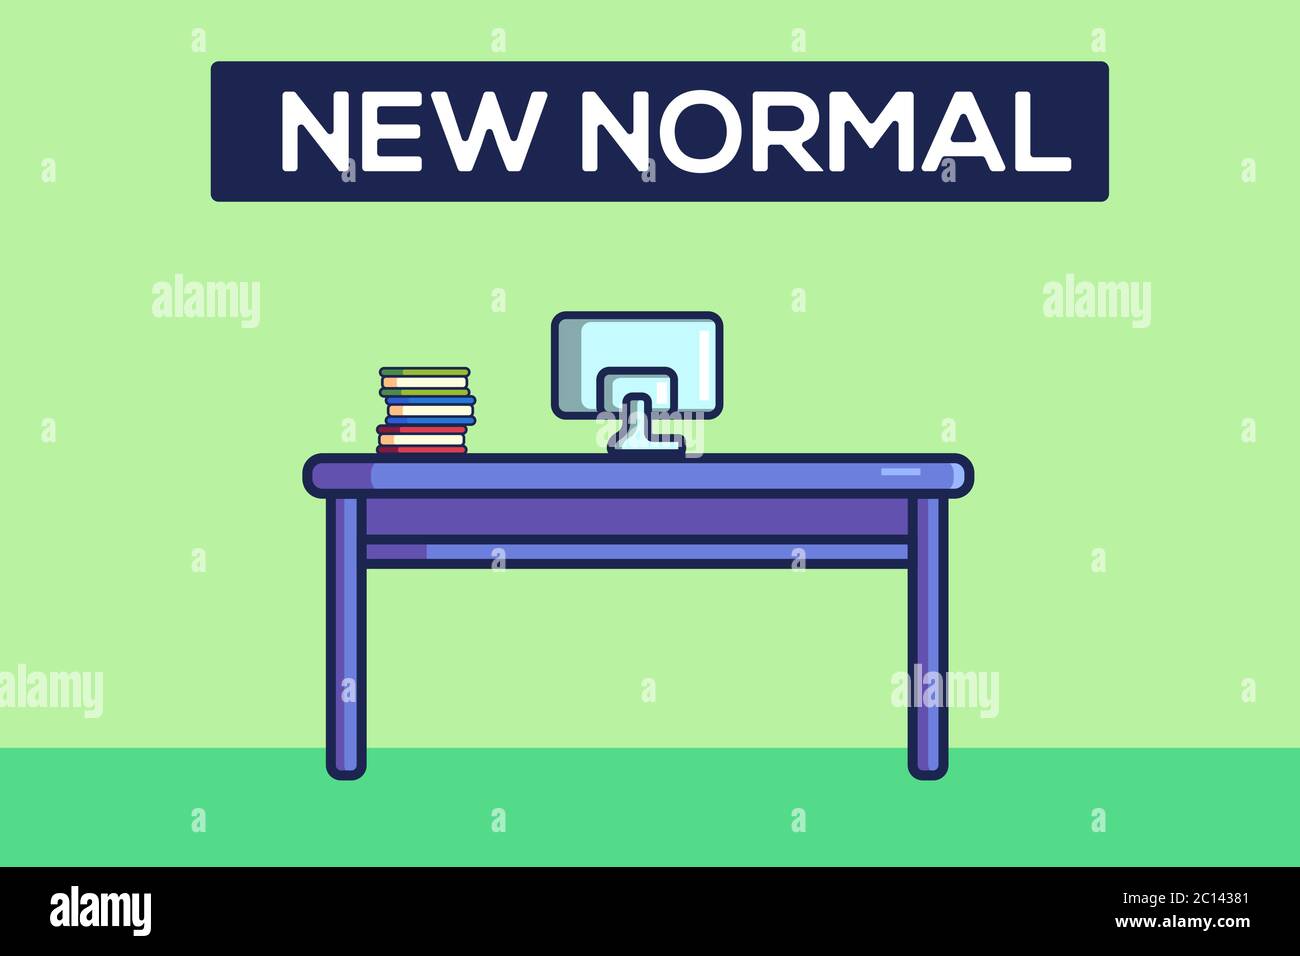 New Normal. Start Working. Work Desk With Computer and Books Vector illustration Stock Vector